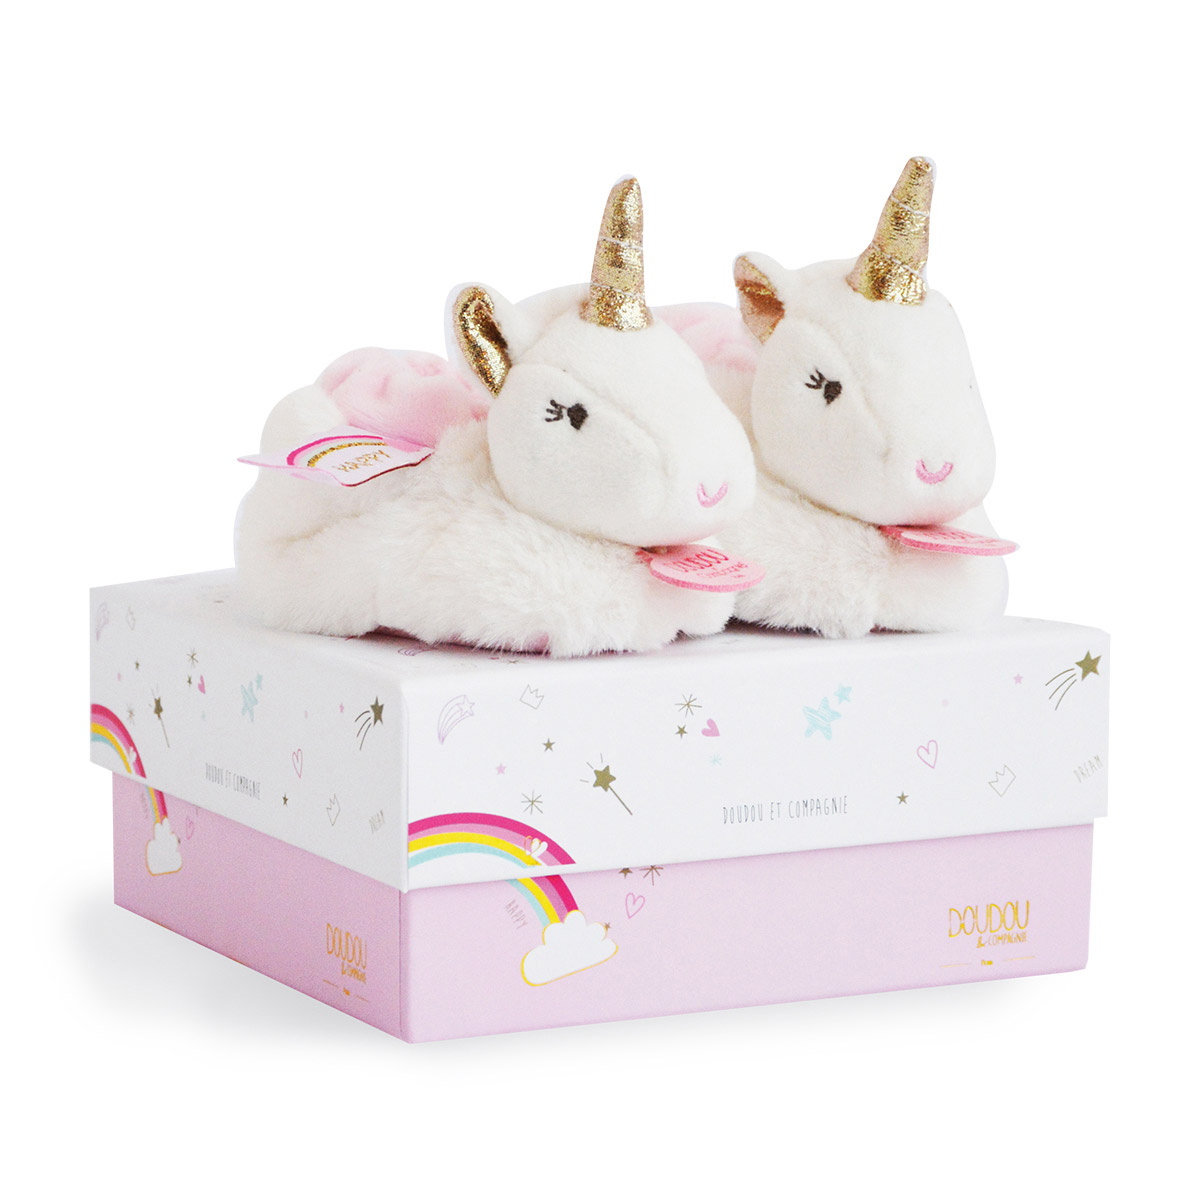 Chausson Licorne Fille - Comfy Family